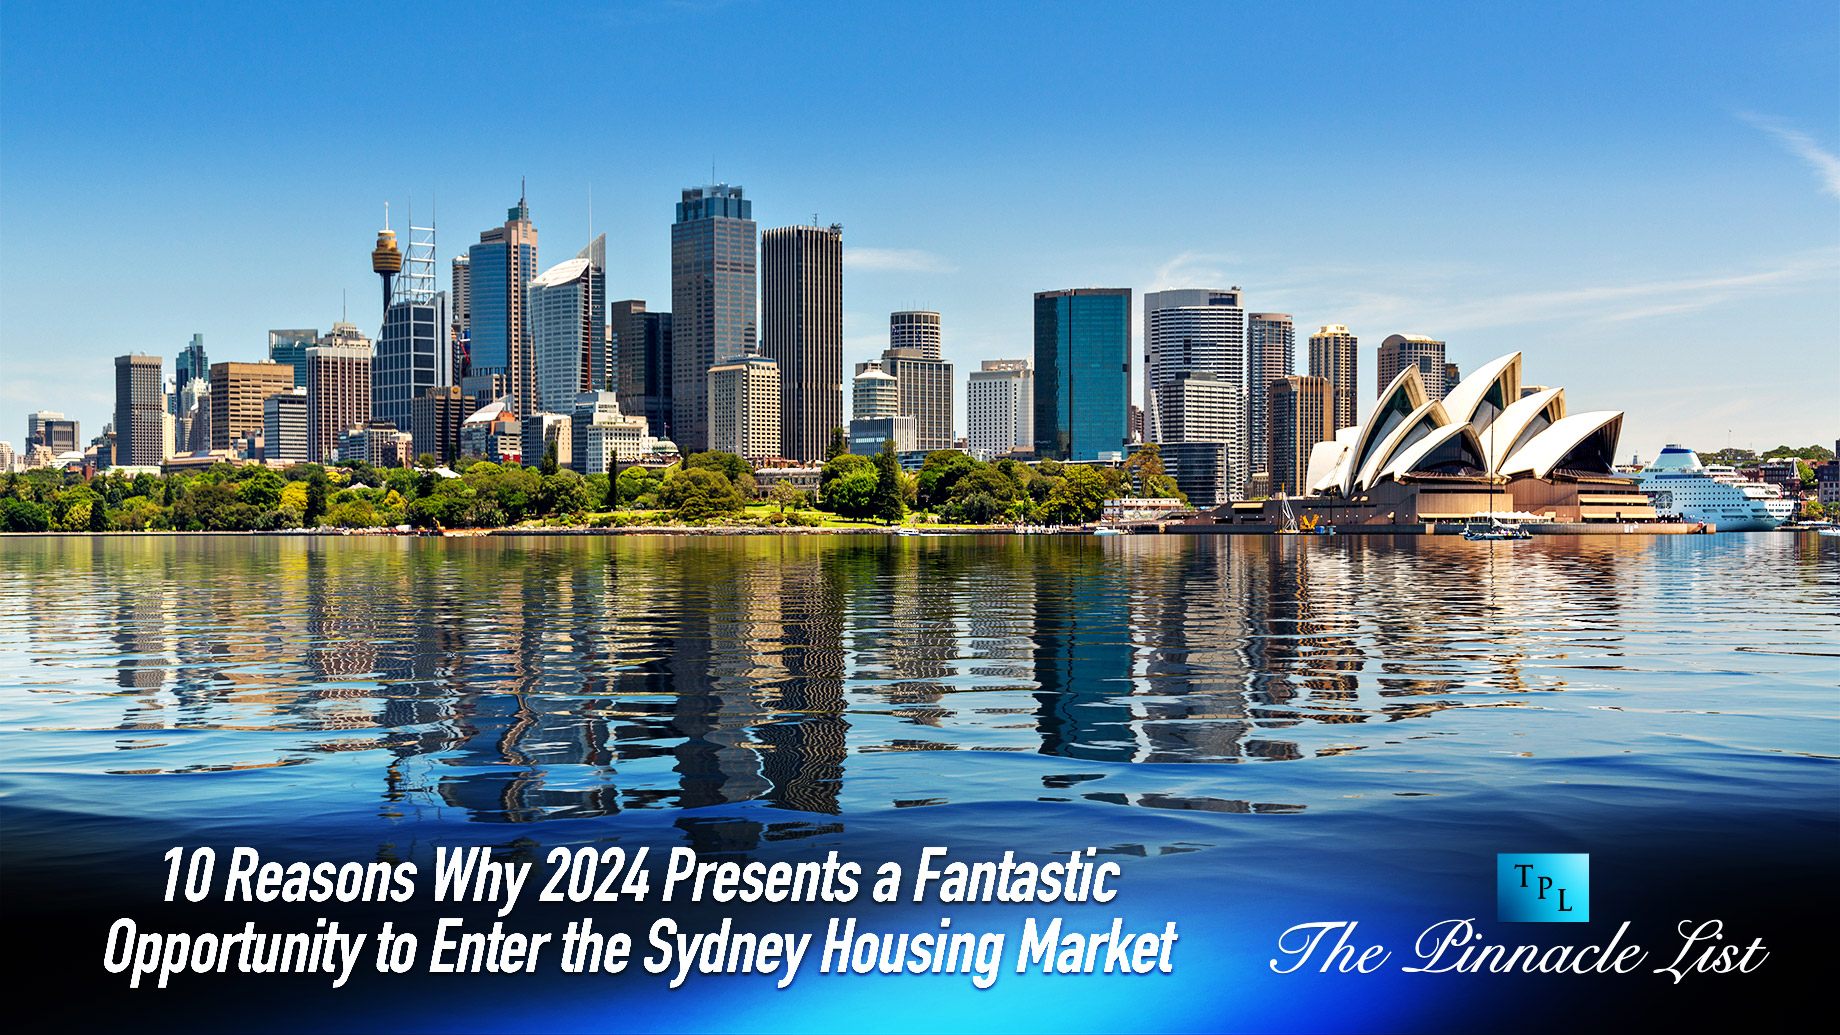 10 Reasons Why 2024 Presents a Fantastic Opportunity to Enter the Sydney Housing Market